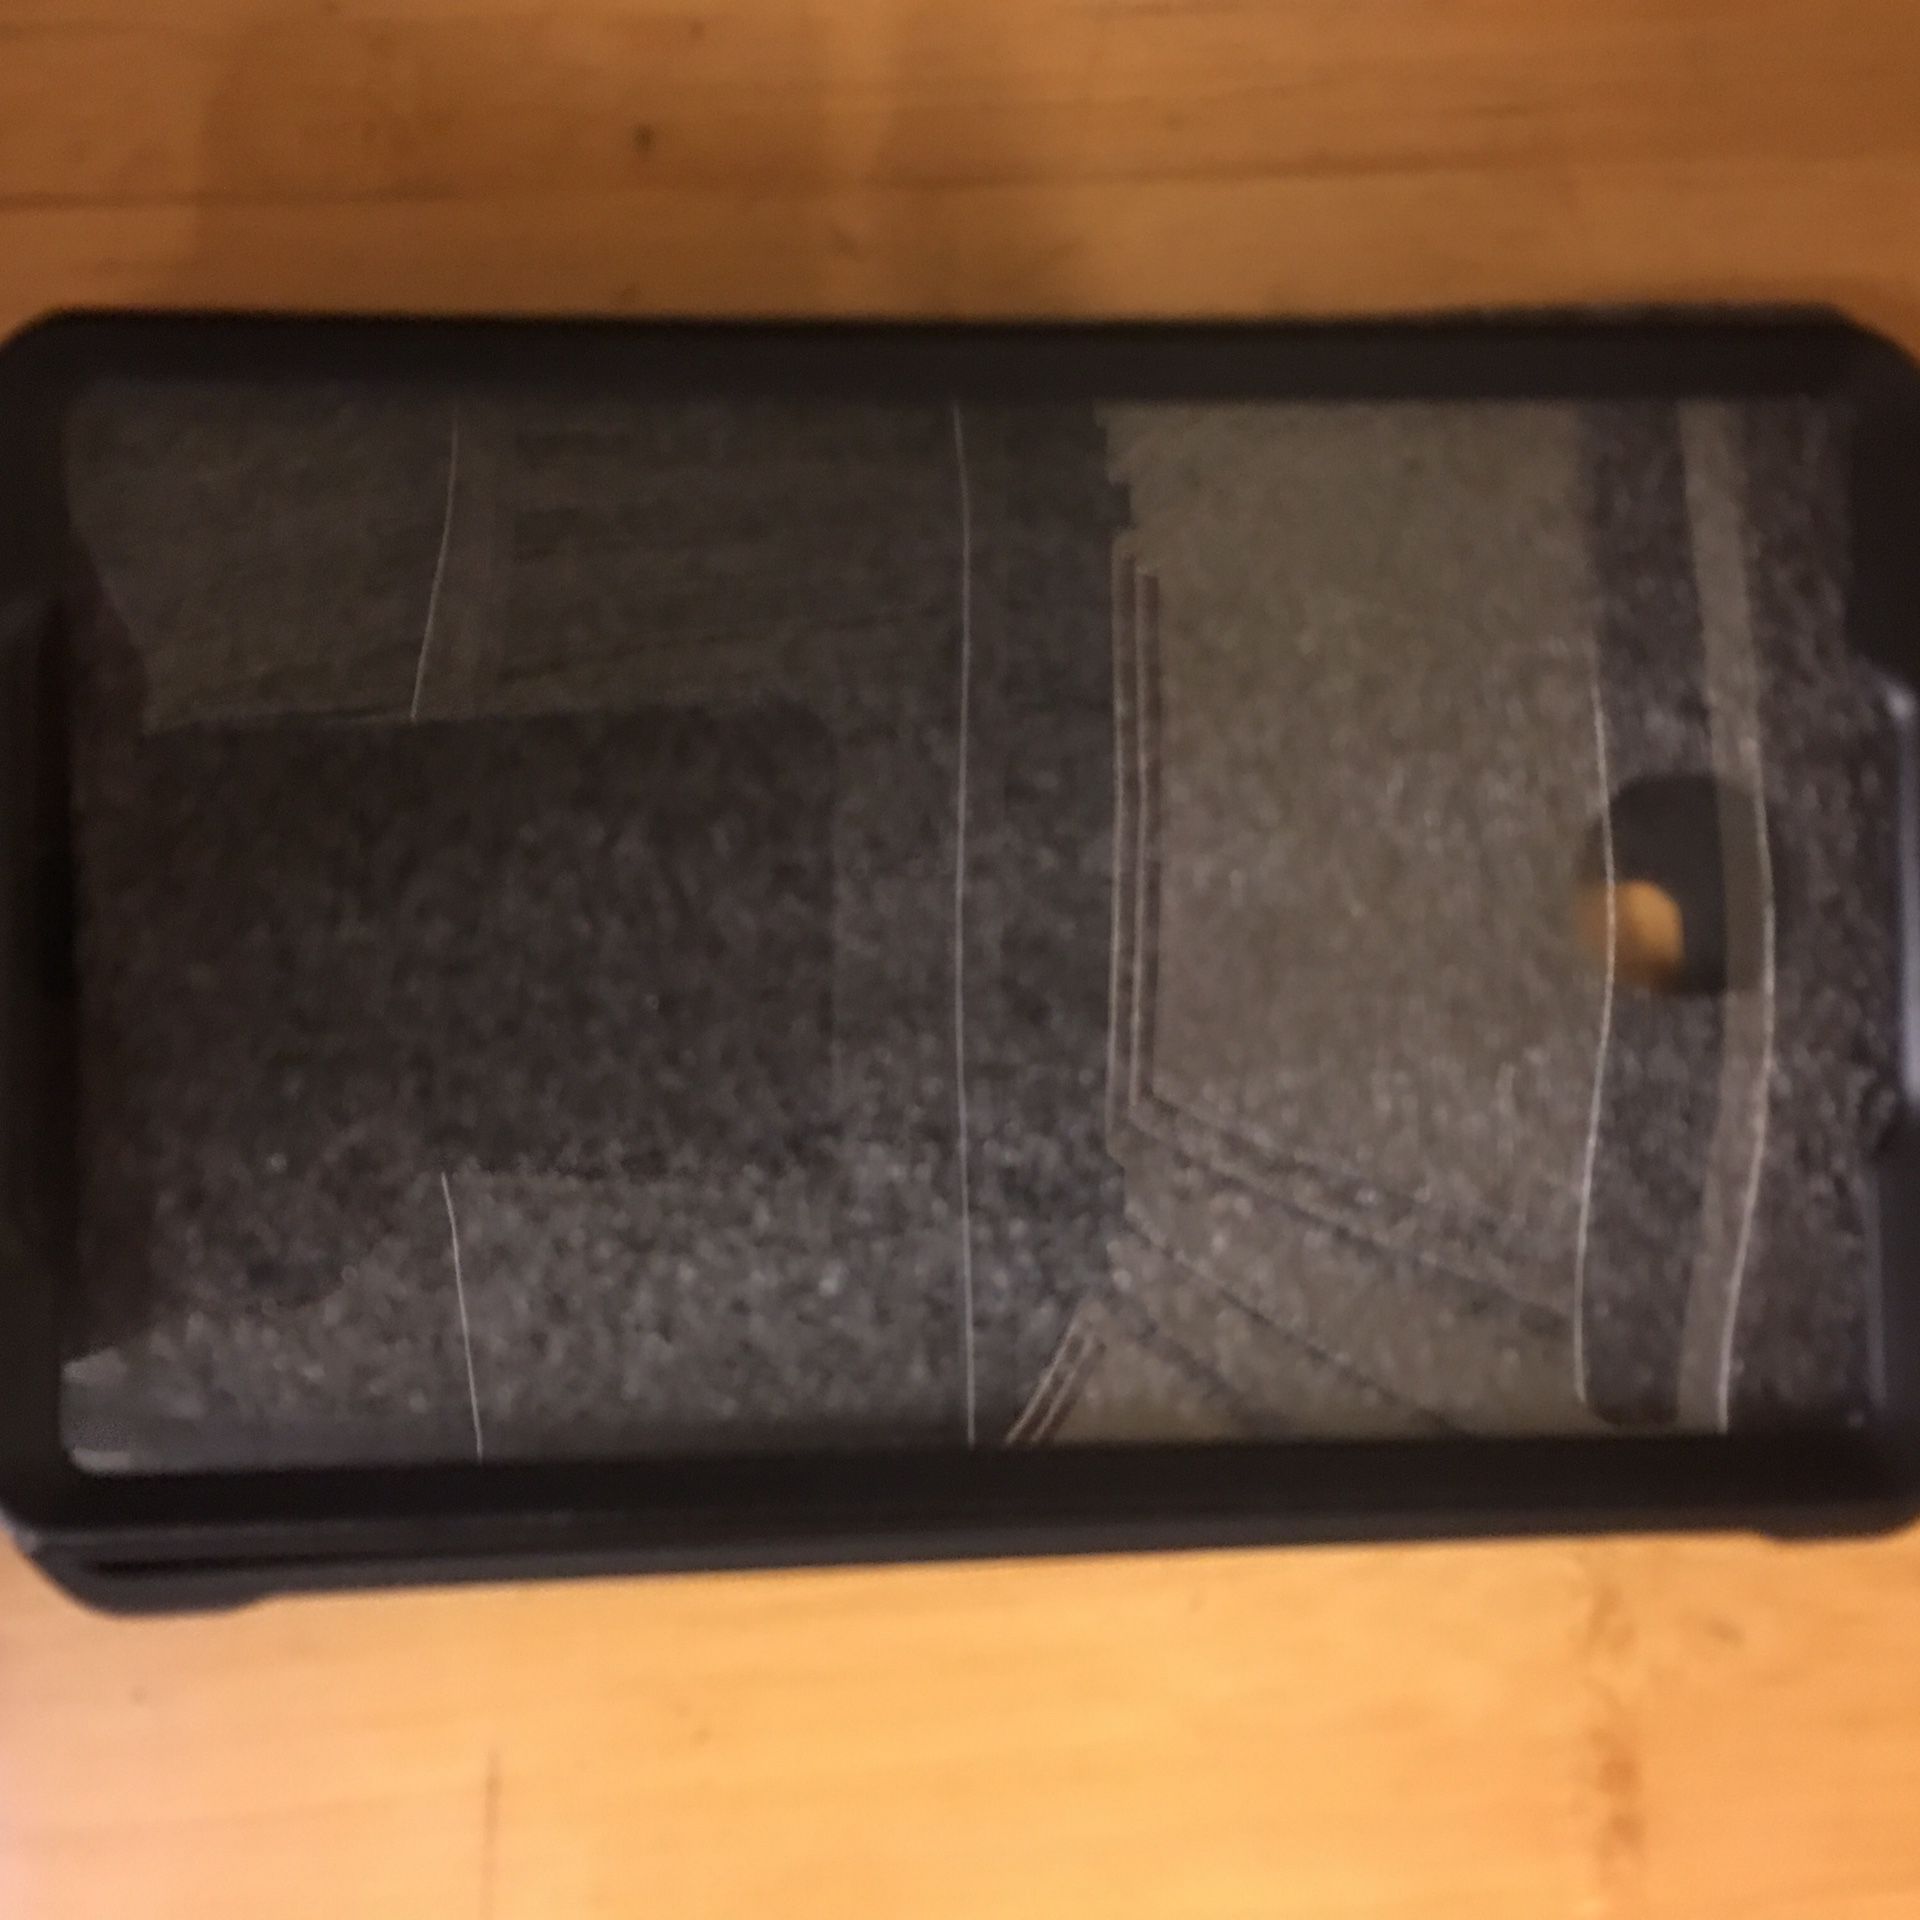 2 Heavy duty cases for Tablets!